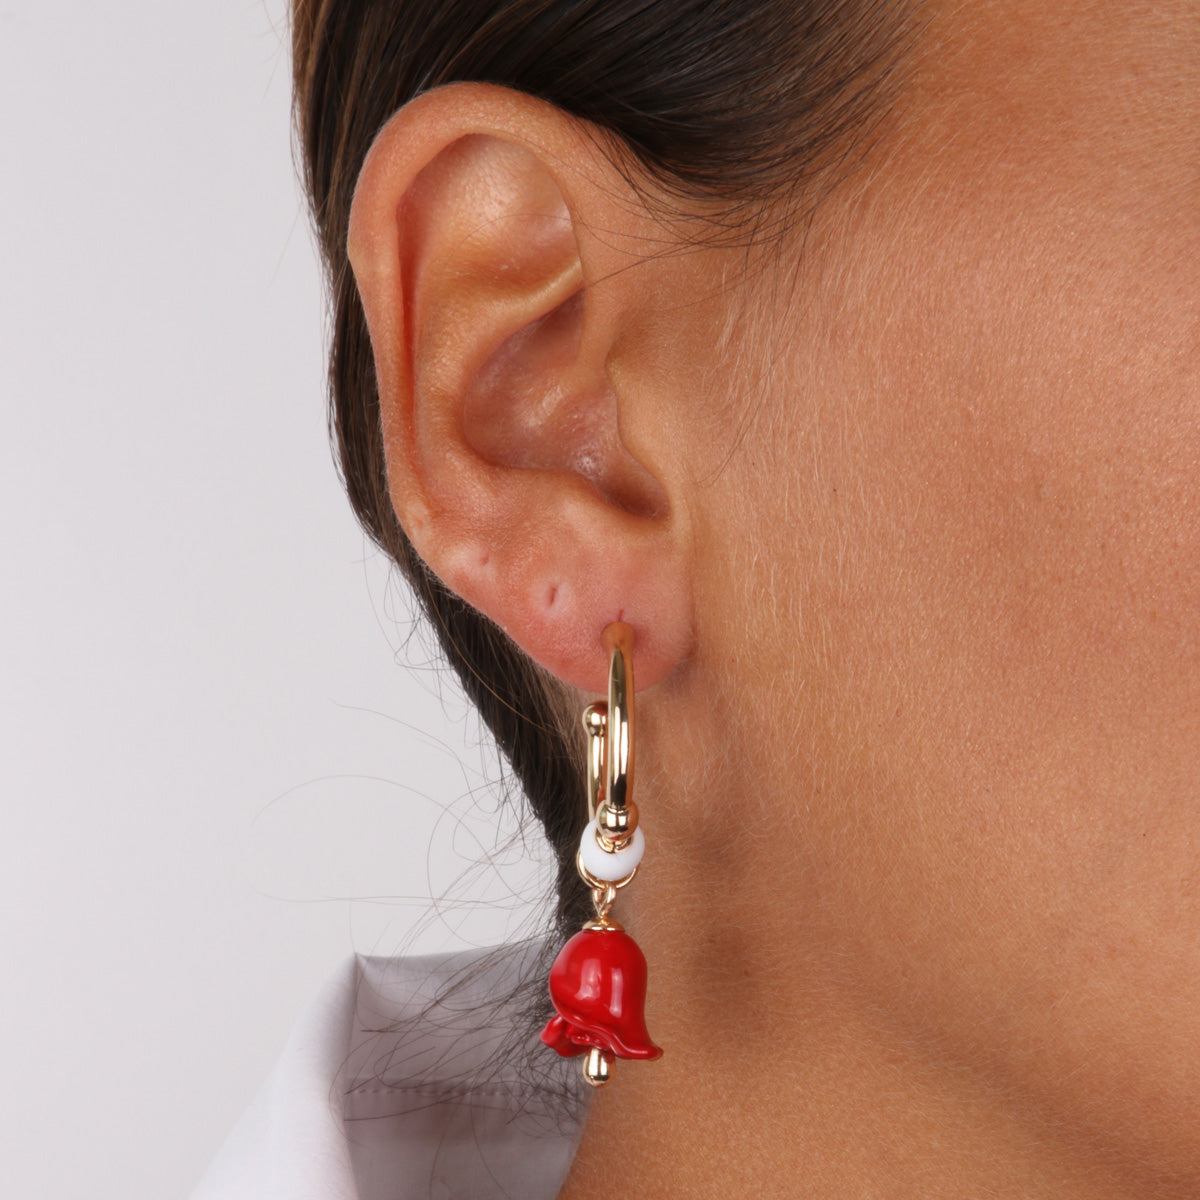 Semicarchie metal earrings with white enameled detail and rose -shaped bell